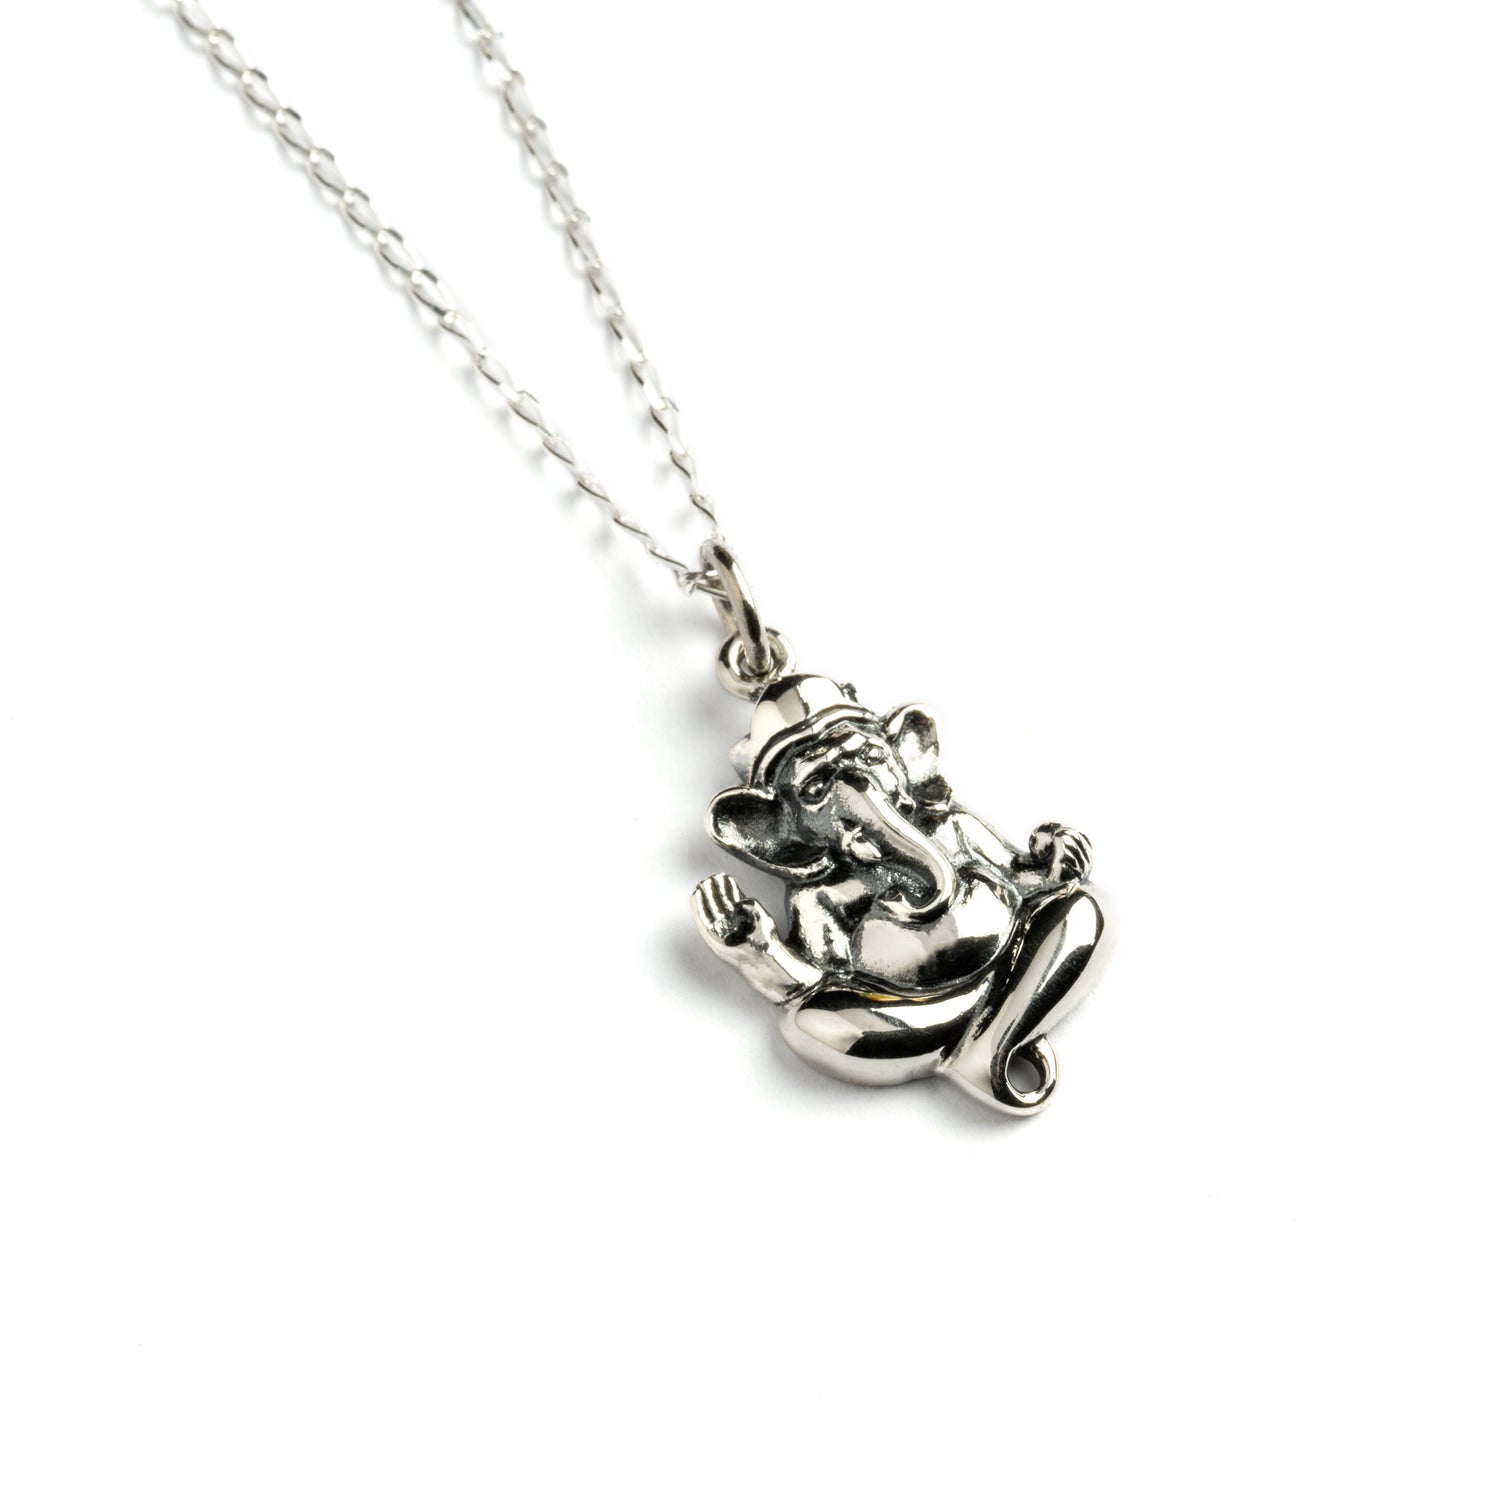 Ganesh Silver charm necklace left side view